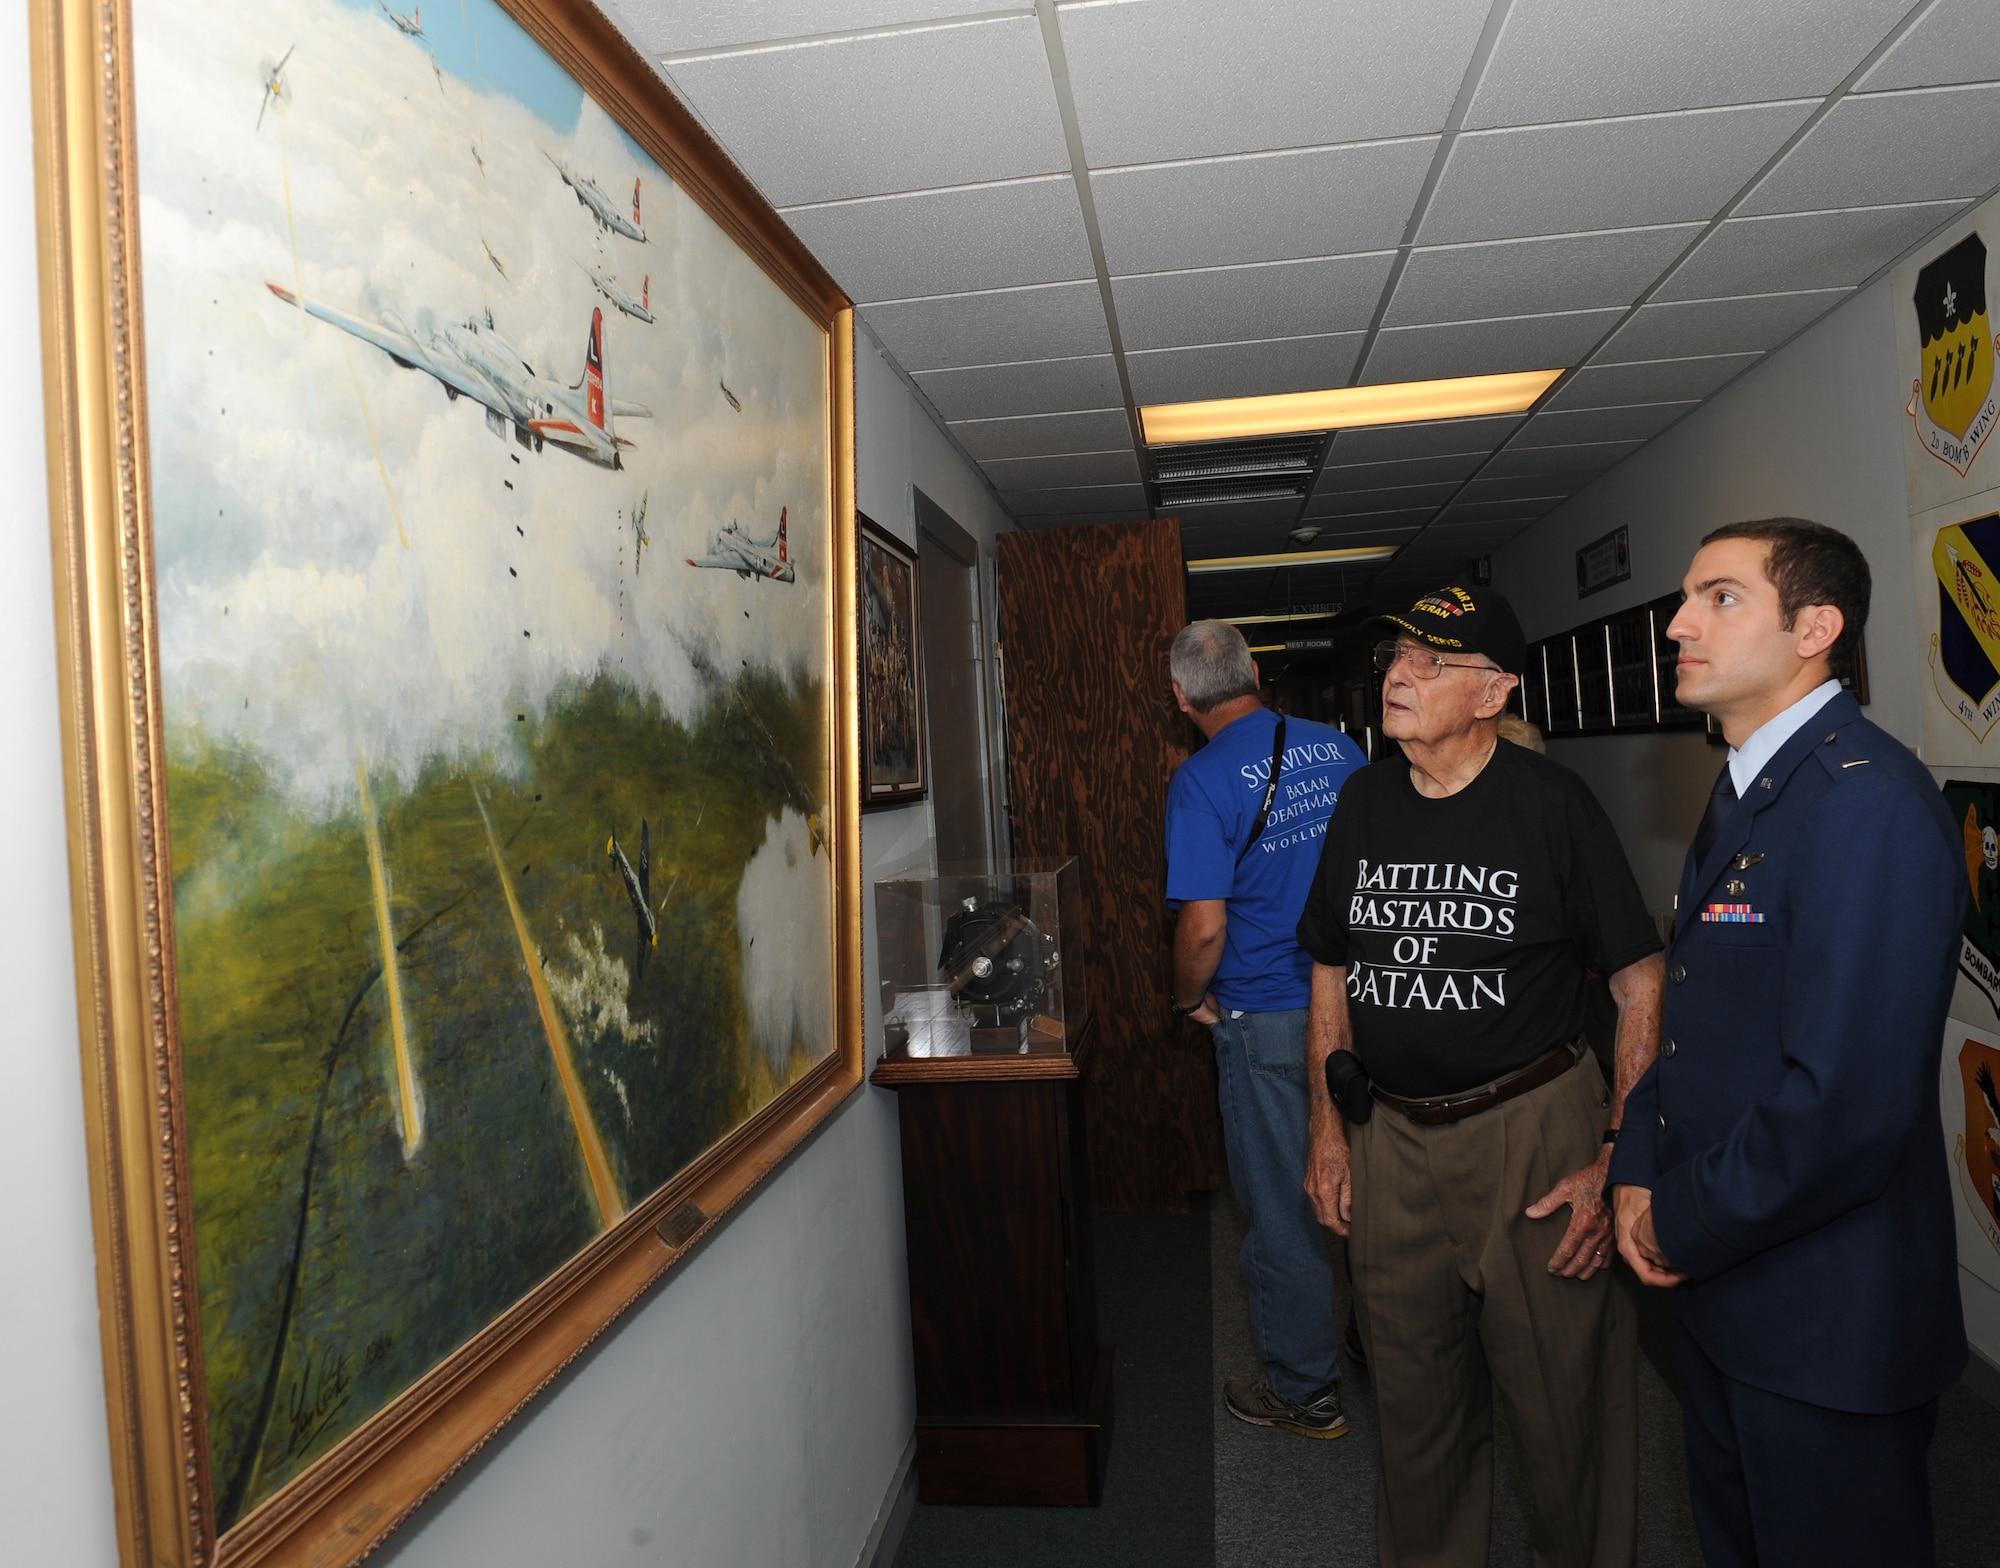 Bataan Death March survivor Erwin Johnson views a painting with his escort 1st Lt. Anthony Mascaro, 11th Bomb Squadron, at the 8th Air Force Museum on Barksdale Air Force Base, La., Sept. 4. Five Bataan Death March survivors were honored by Barksdale leadership, given a tour of the museum and received medals for their sacrifice. (U.S. Air Force photo/Airman 1st Class Benjamin Gonsier)(RELEASED)